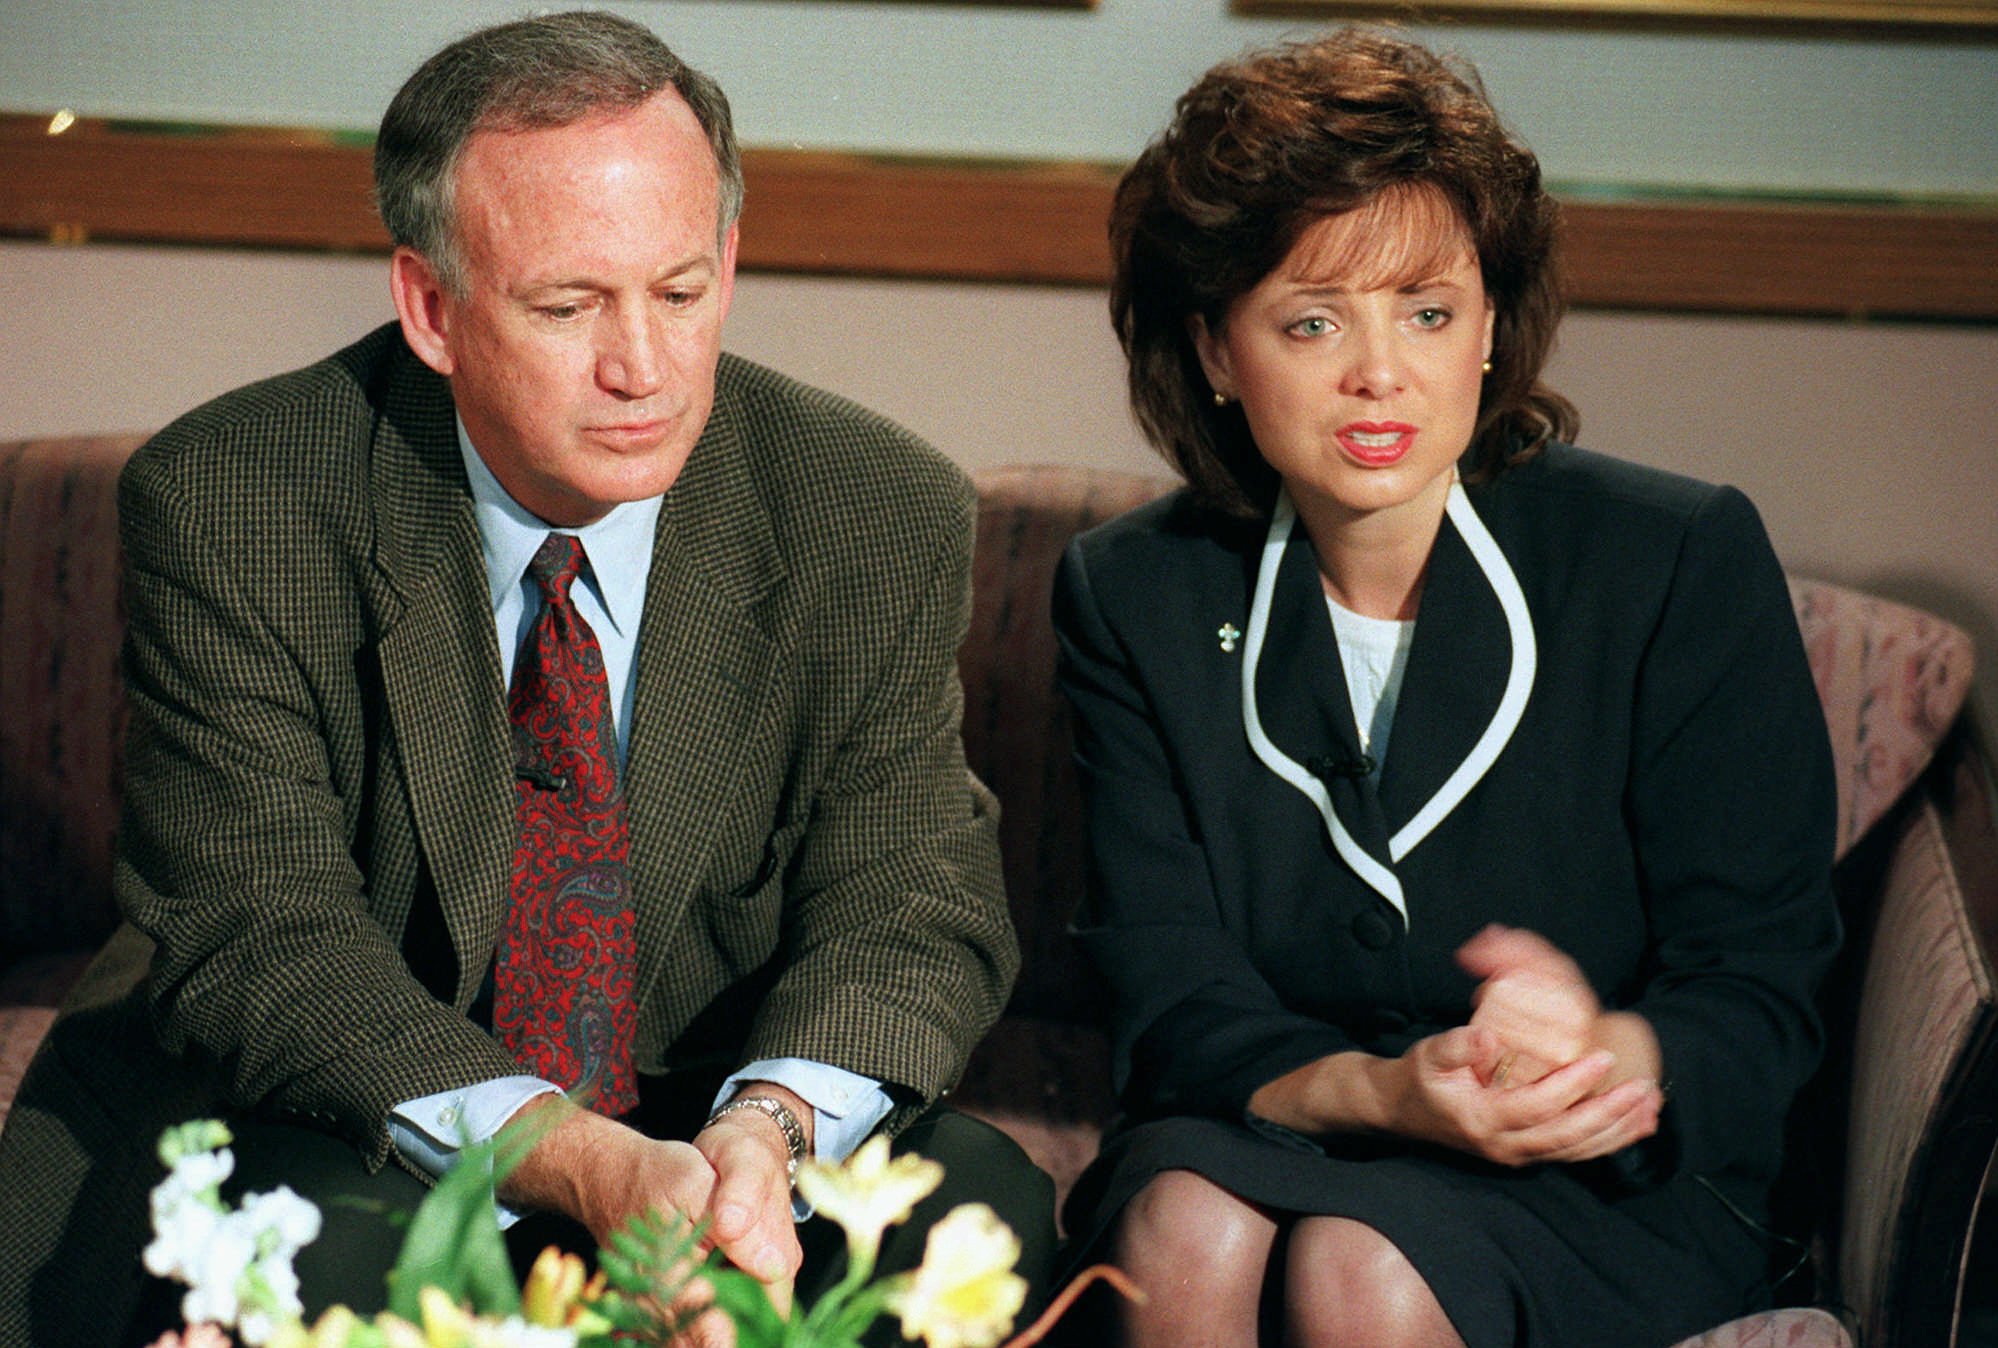 PHOTO: John and Patsy Ramsey is shown meeting reporters on May 1, 1997, in Boulder, Colorado. The couple were interviewed by the police Wednesday and talked to reporters about the murder of their 6-year-old daughter JonBenet Ramsey.